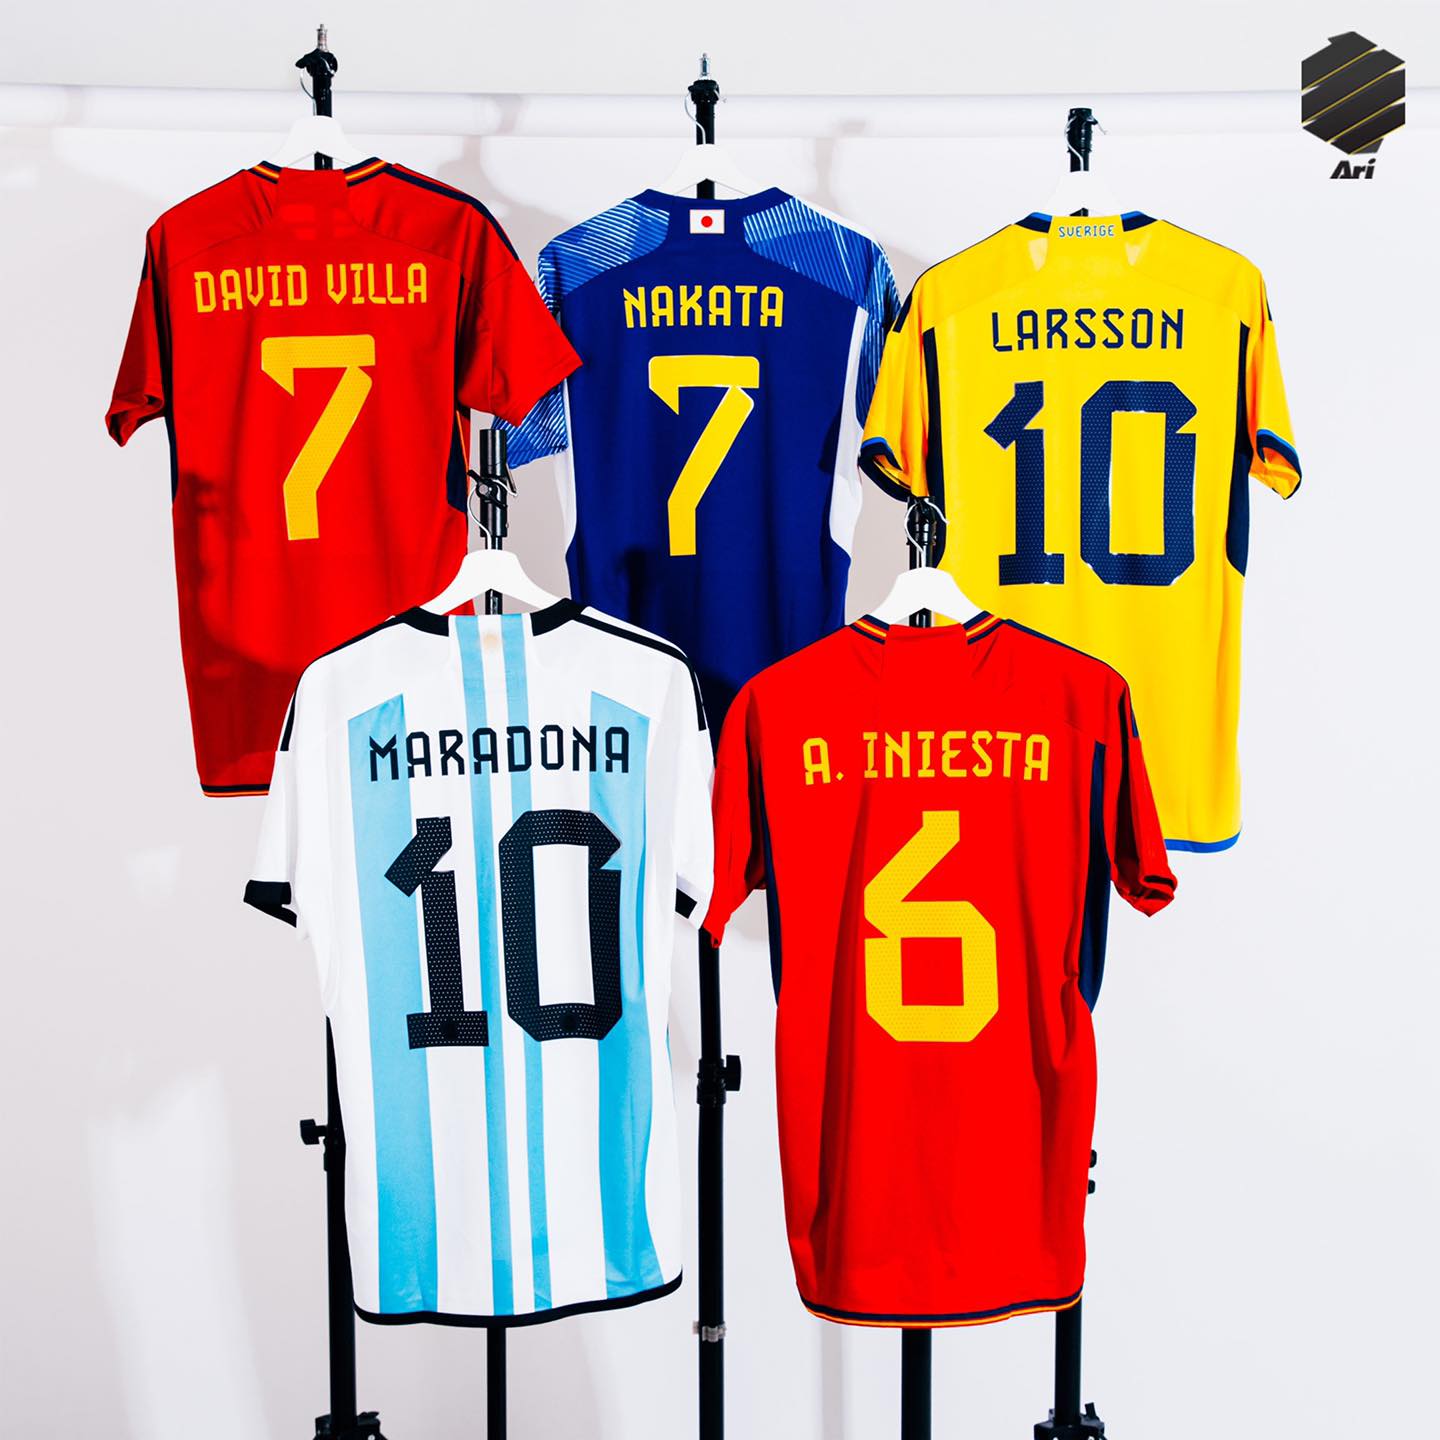 looking for a font that is used on alot of soccer jerseys